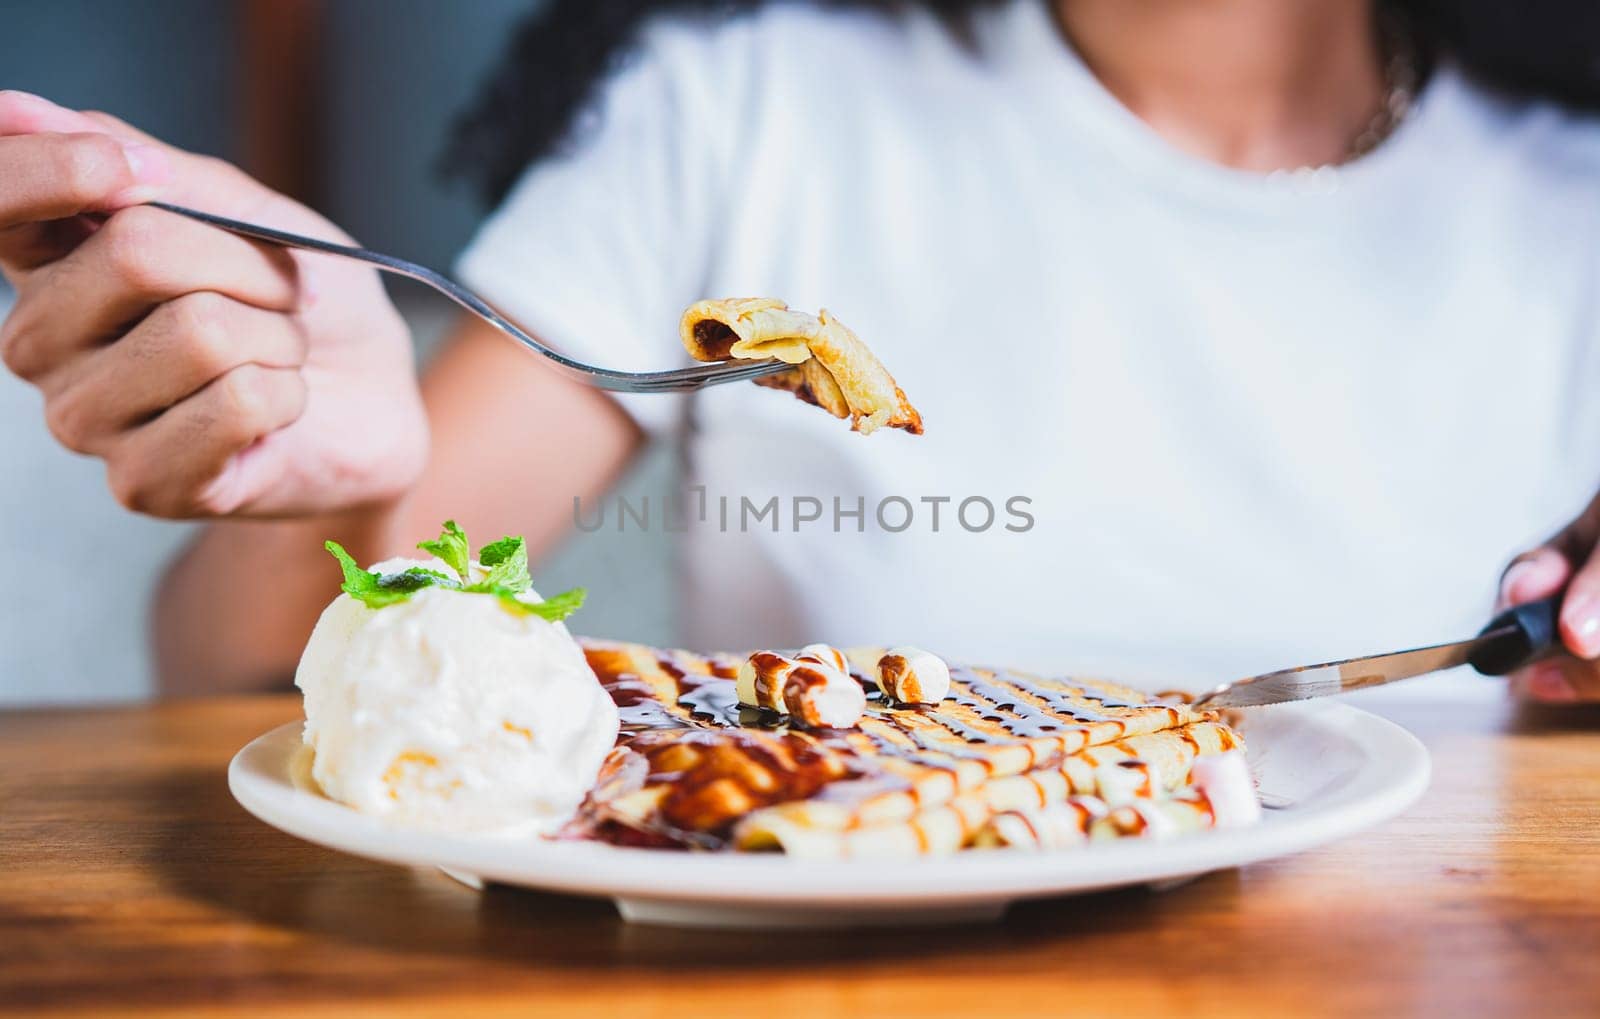 Close up of woman eating chocolate crepe and ice cream with fork. Hands of person with fork cutting chocolate crepe and ice cream by isaiphoto